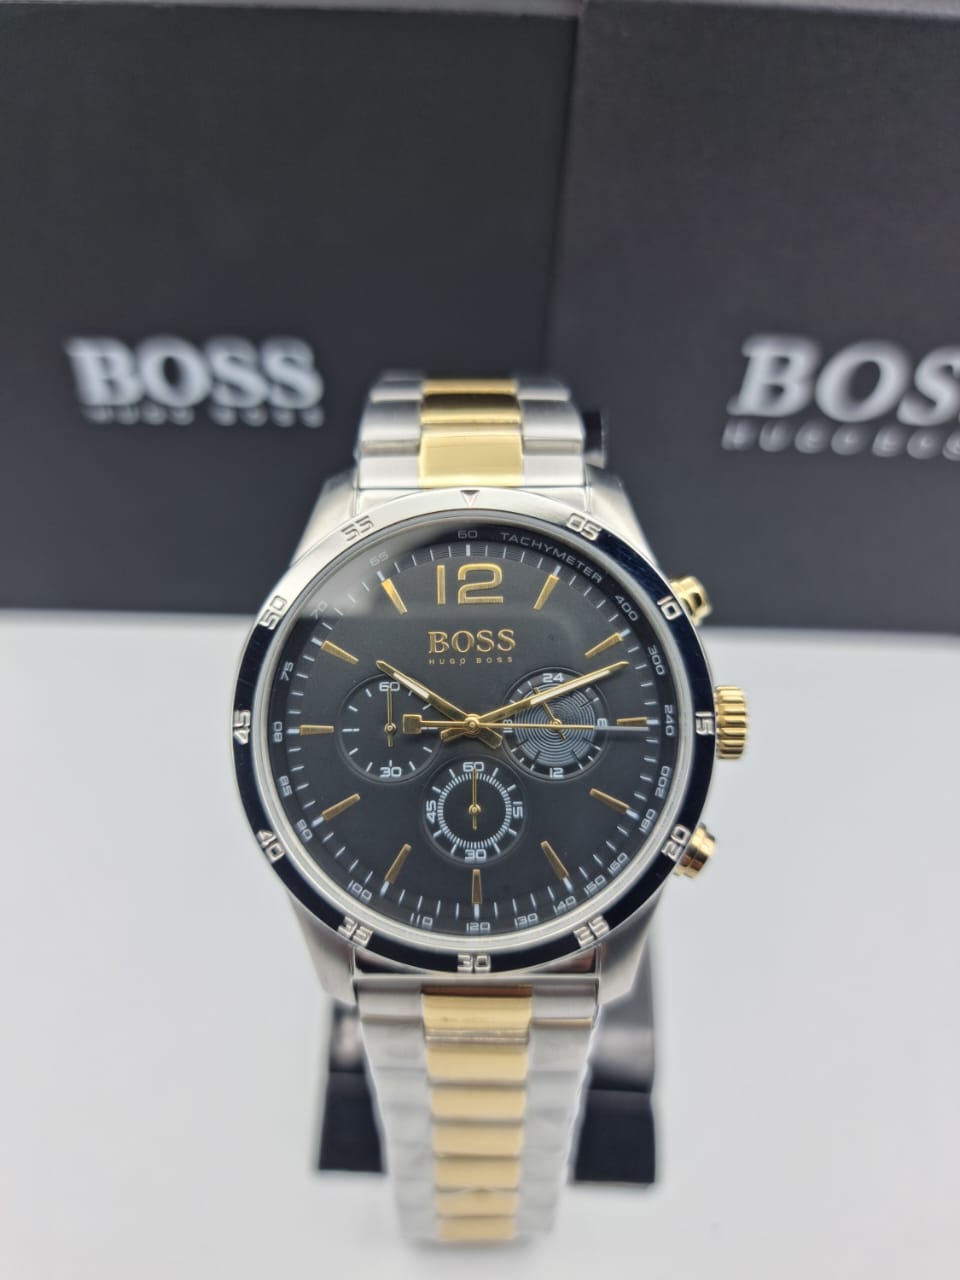 Hugo Boss Professional Two-Tone Stainless Steel Black Dial Chronograph Quartz Watch For Gents - Hugo Boss 1513529